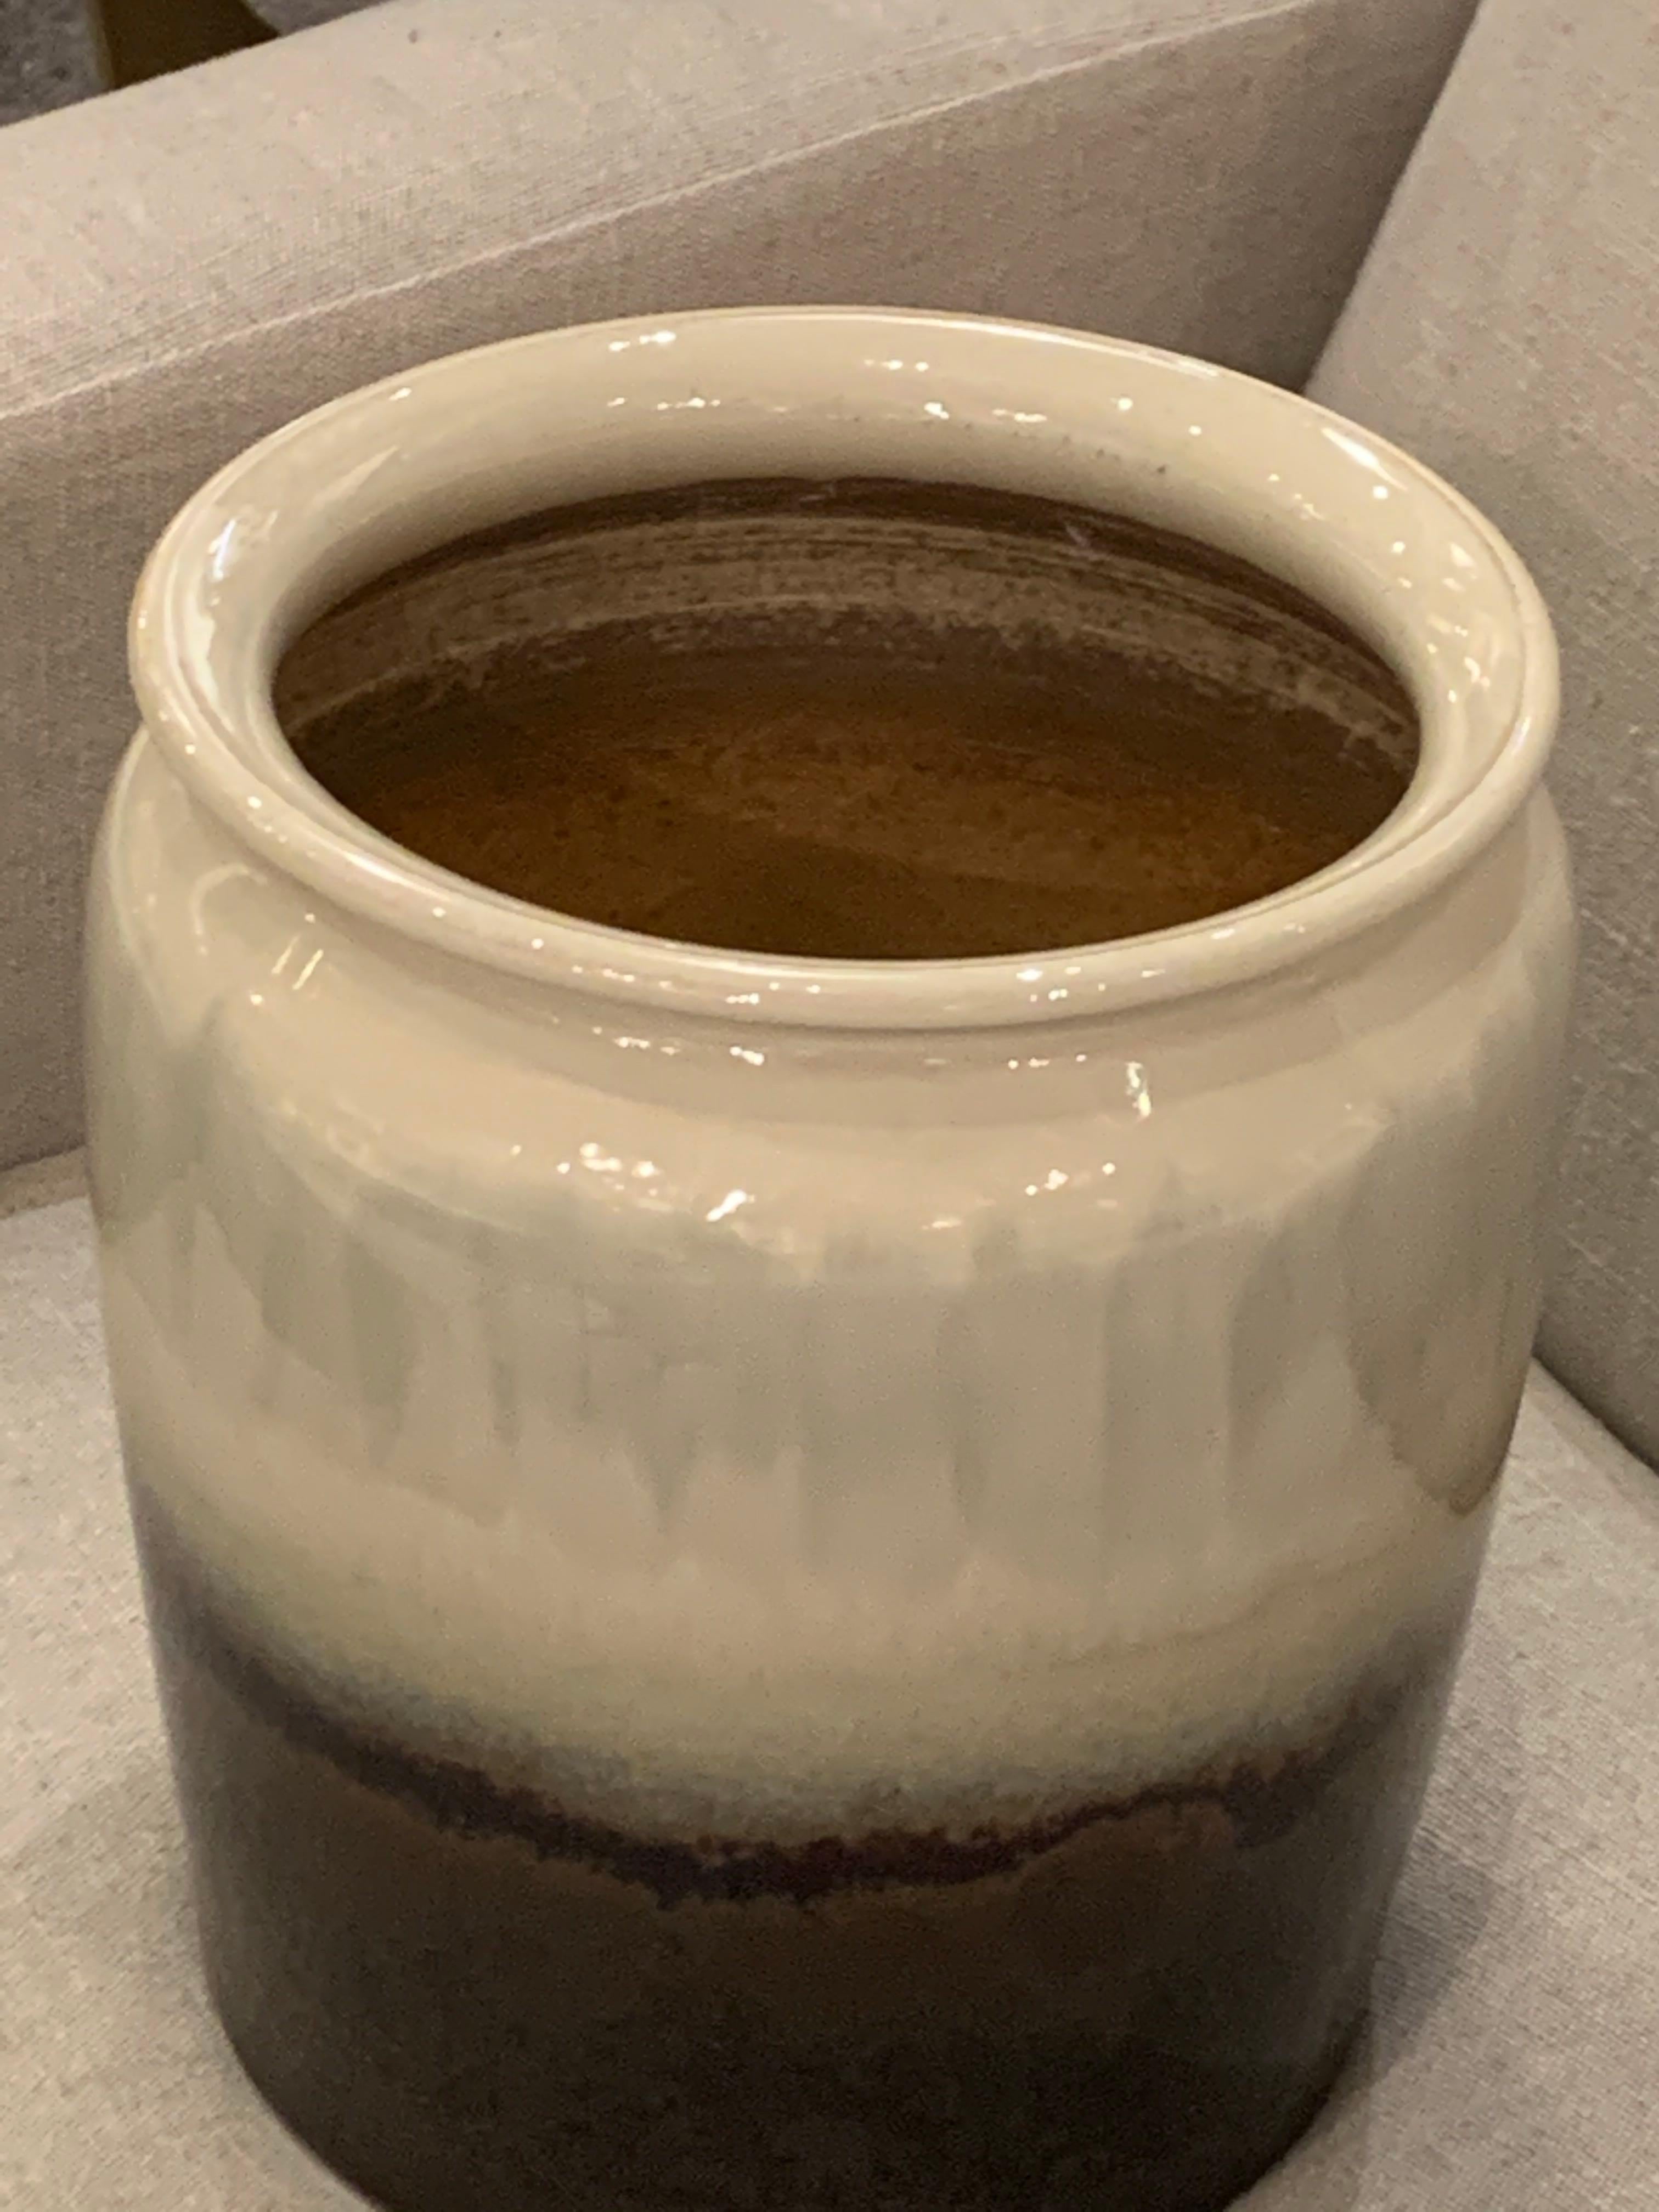 Contemporary Chinese ceramic pot with decorative drip glaze.
Dark brown/black base with horizontal color bands of taupe, sage and blue

  